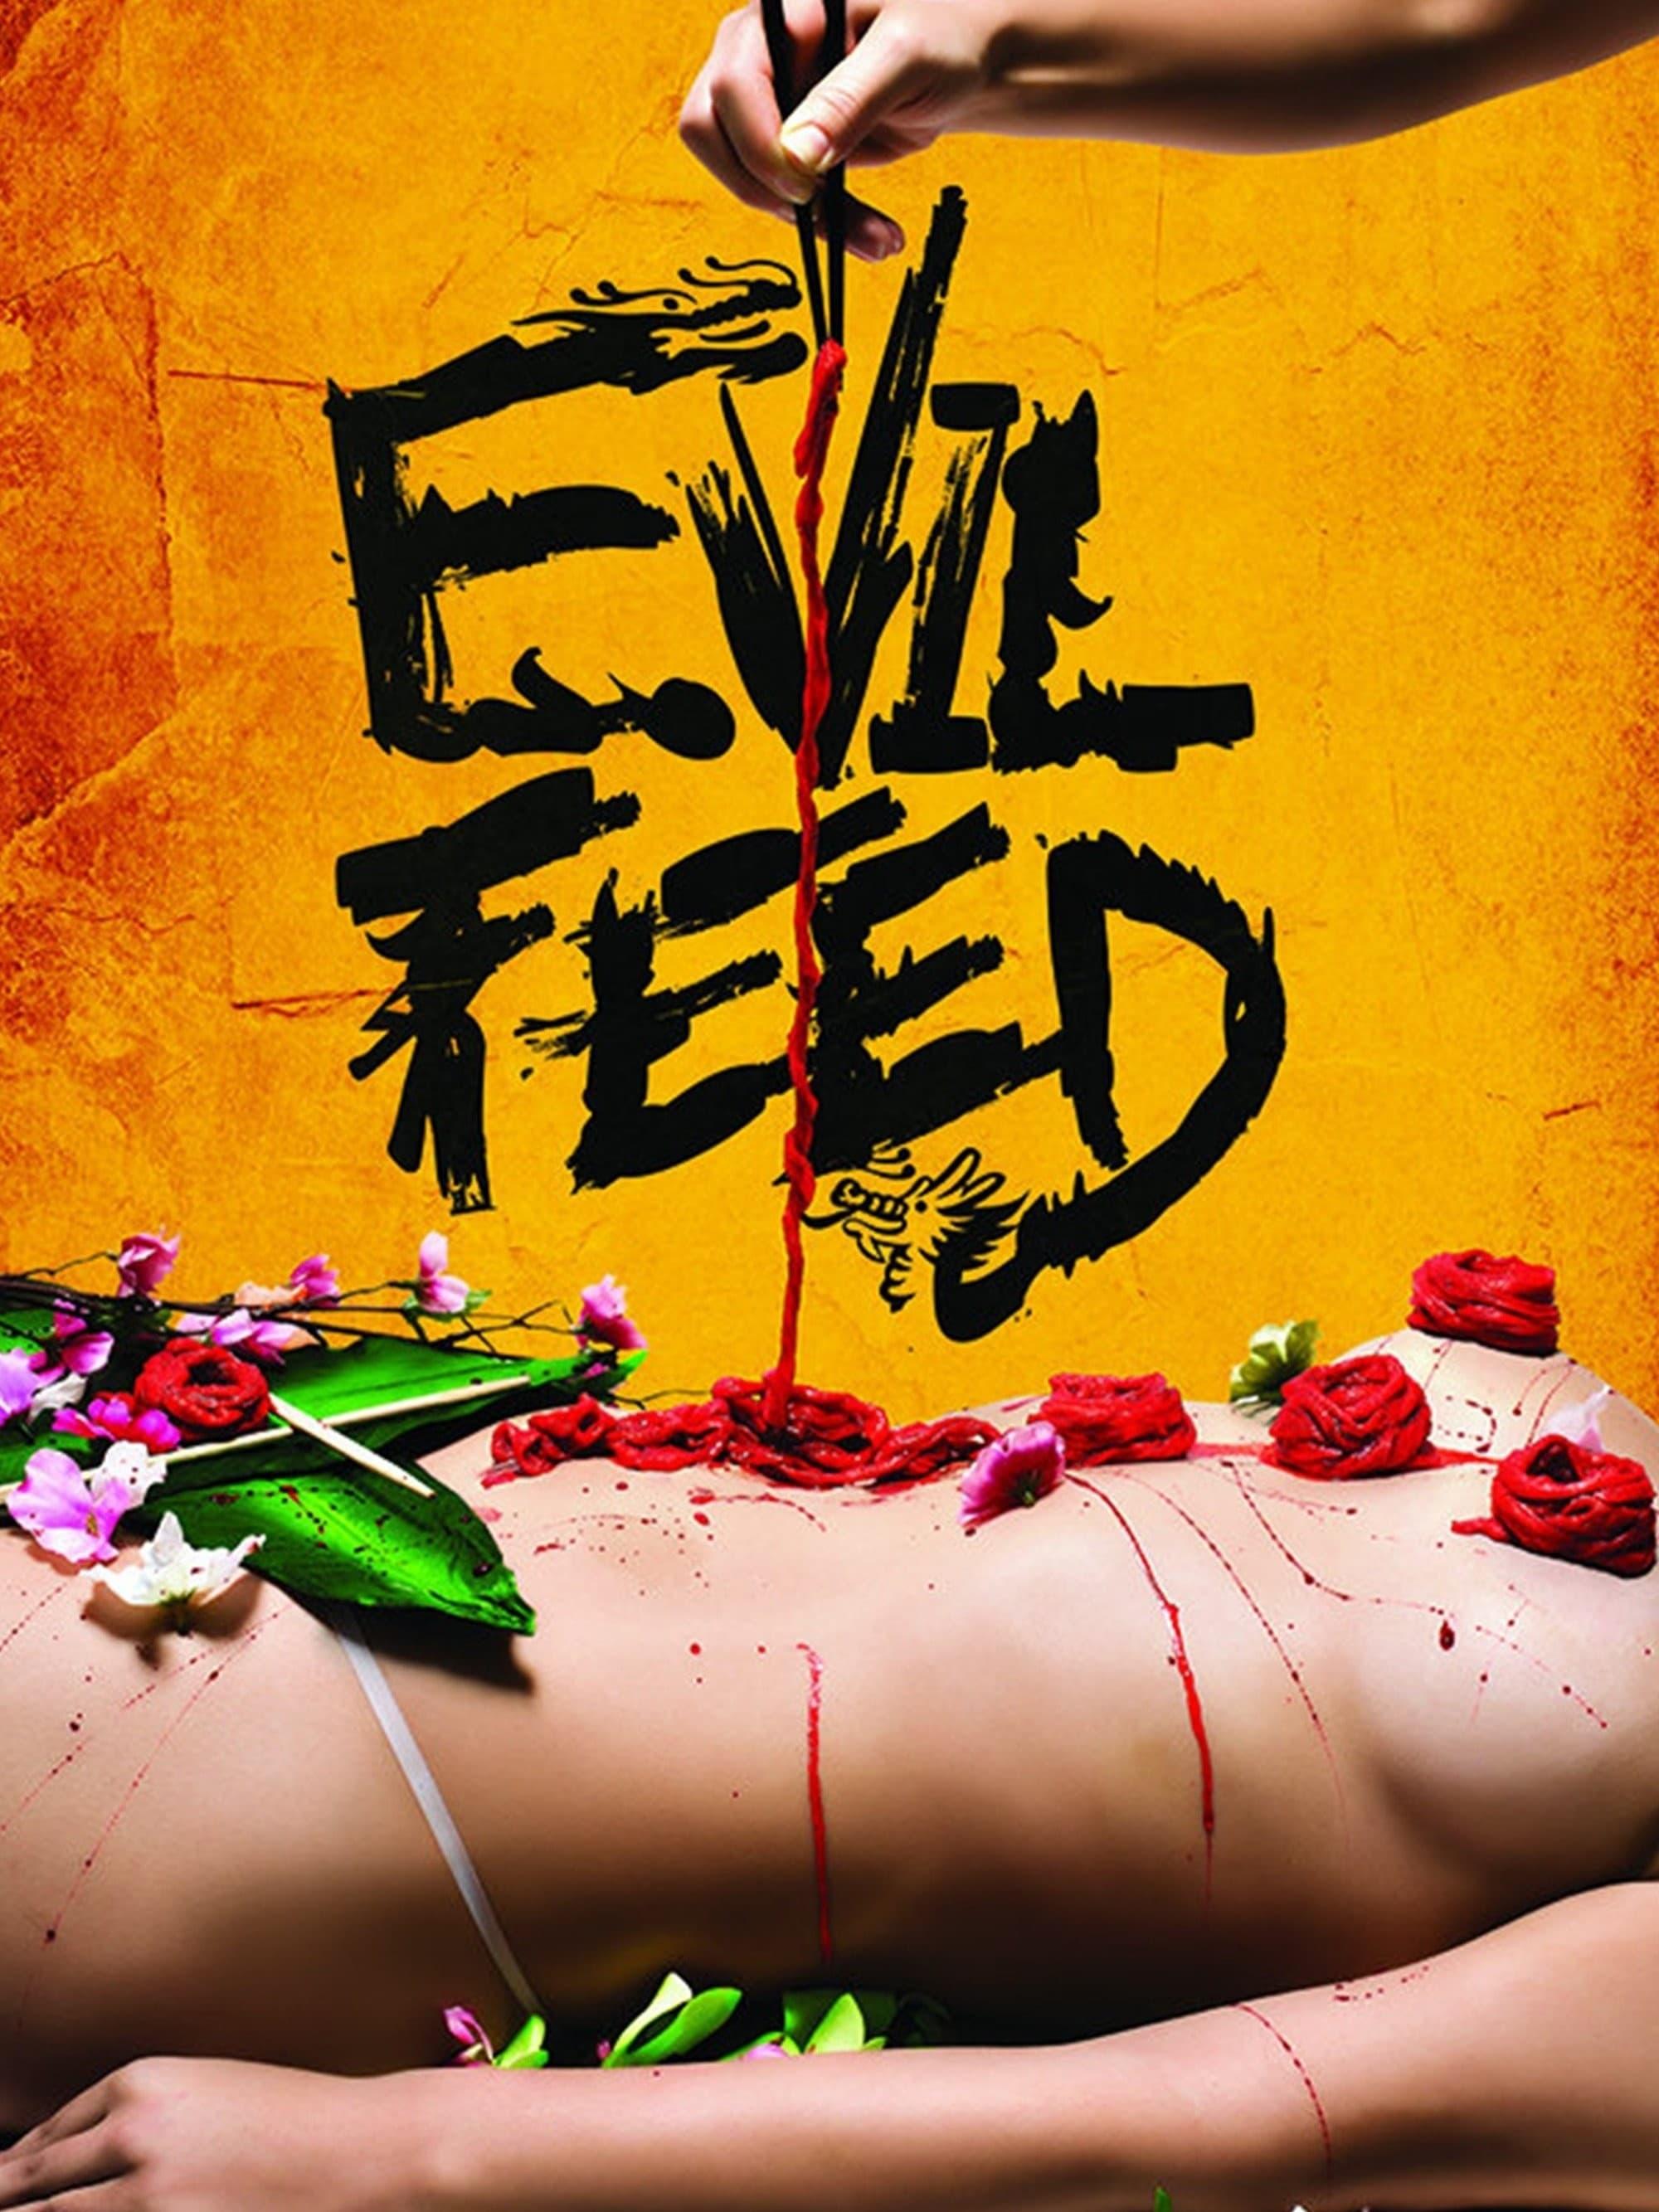 Evil Feed poster